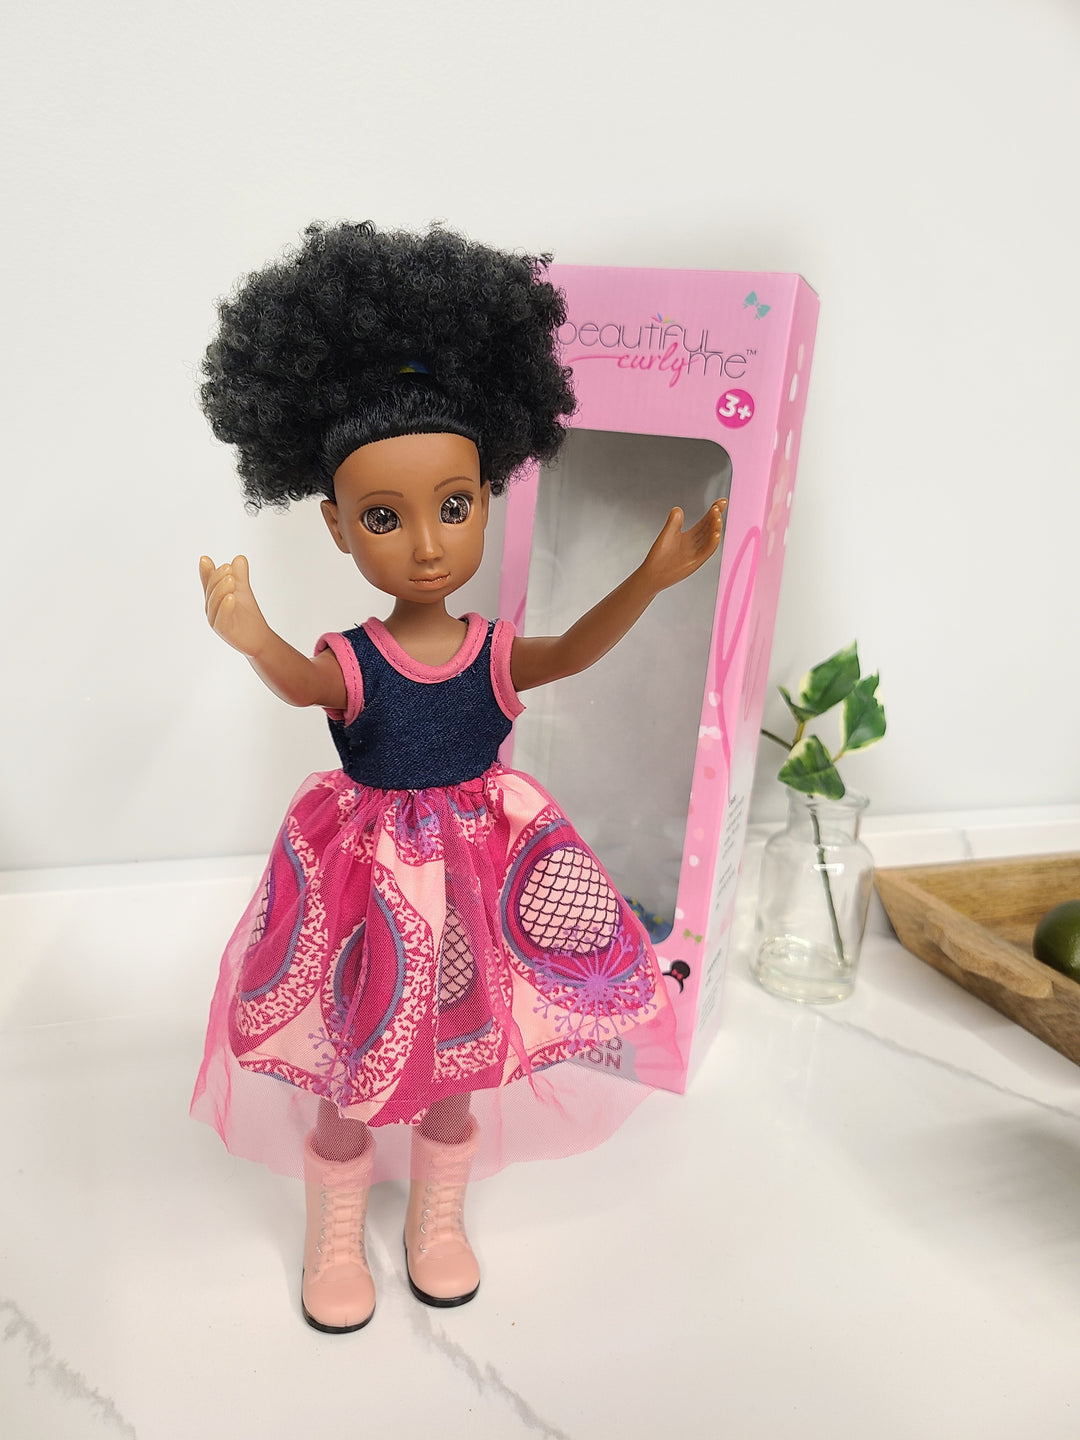 Mini Bella Doll - Limited Edition 13inch-Beautiful Curly Me